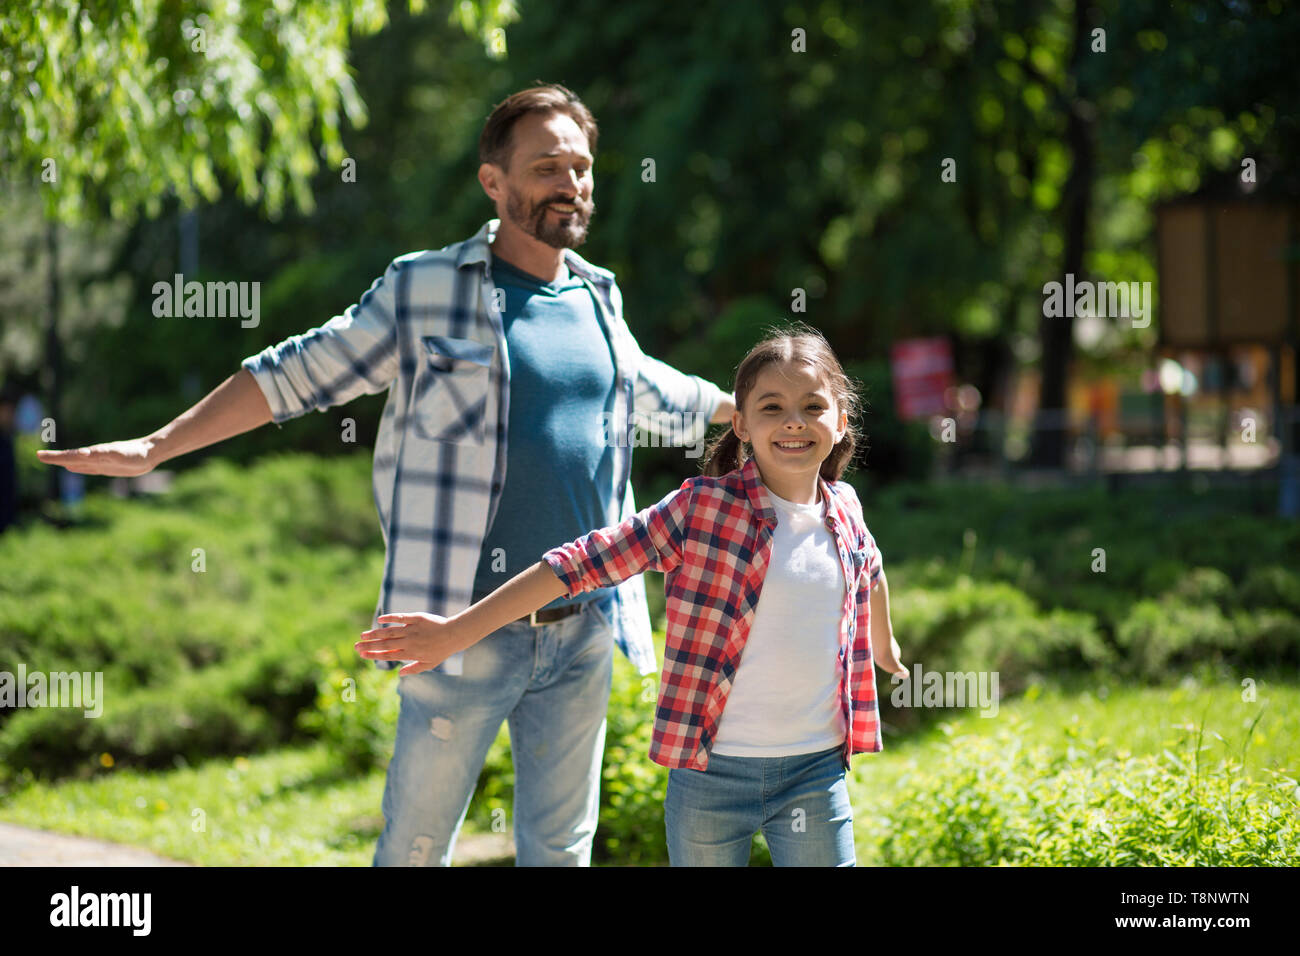 Father Spending Time with Daughter In The Park While Standind Whith Wild Opened Hands And Smiling. Stock Photo